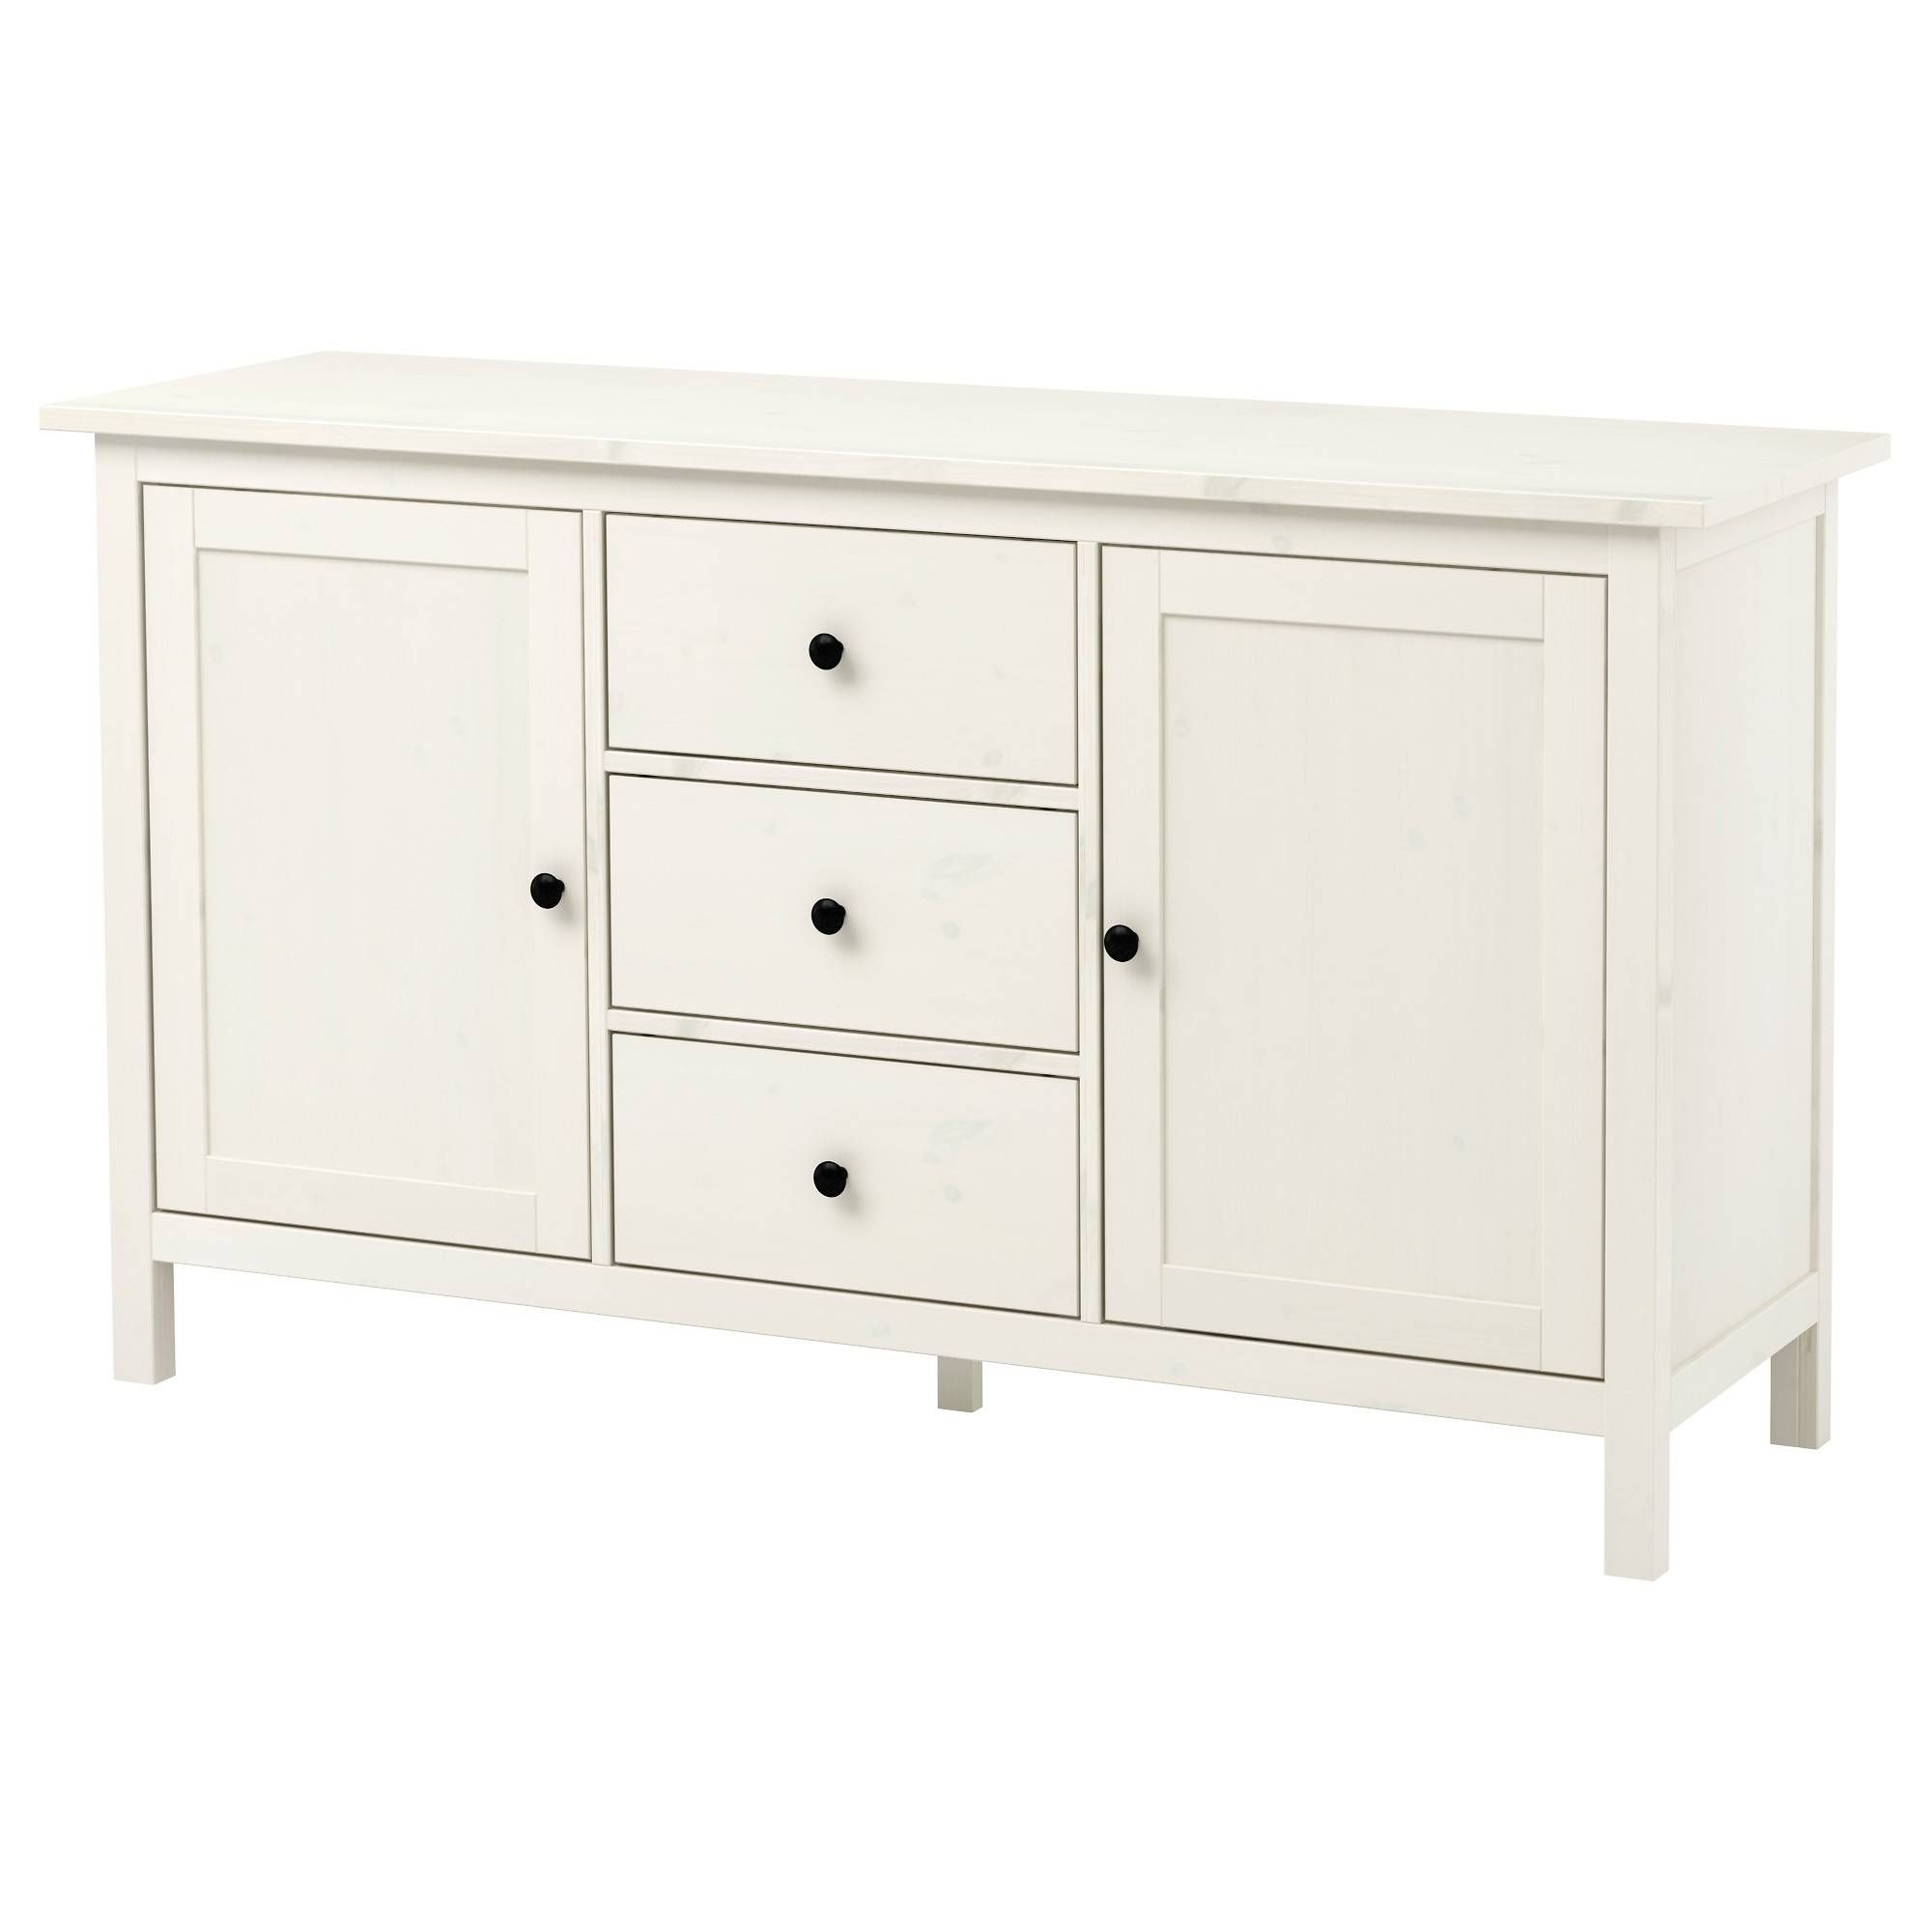 Buffet Tables & Sideboards – Ikea In Sideboard Units (View 28 of 30)